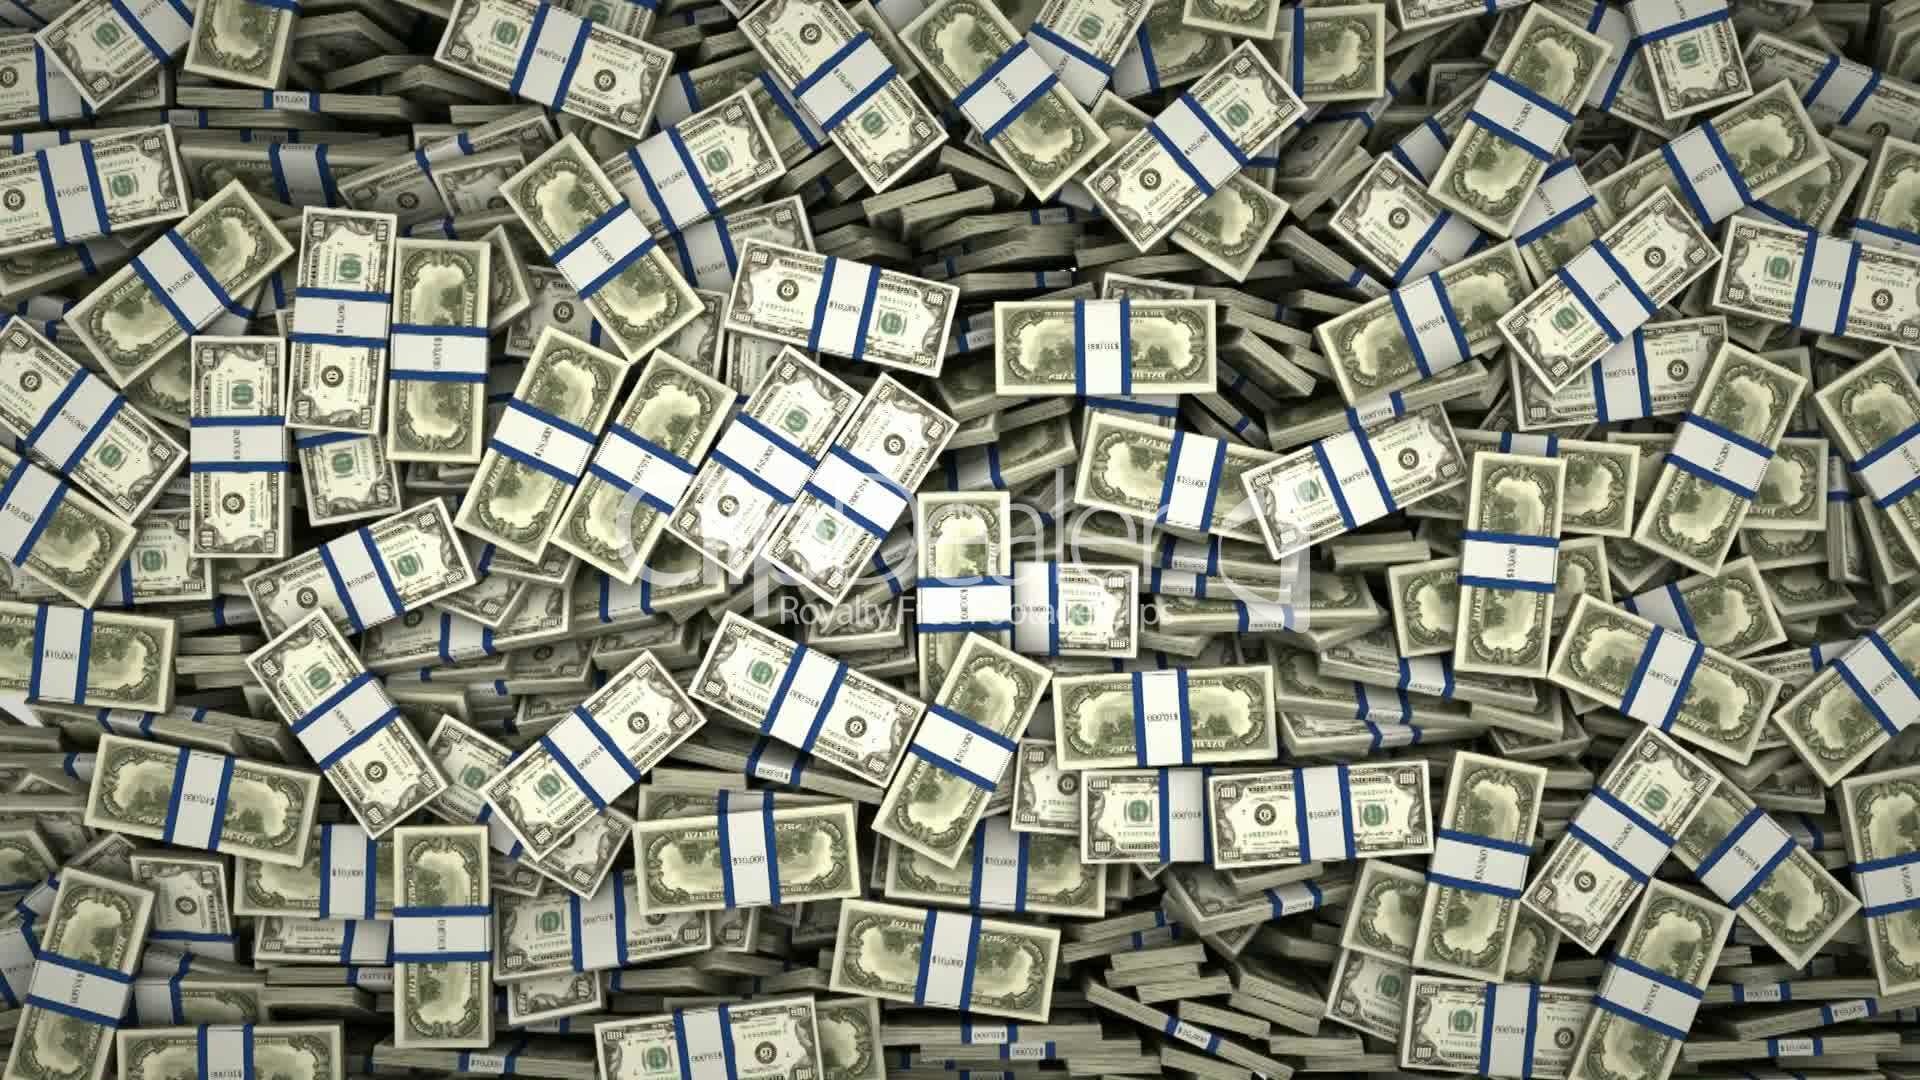 1920x1080 Dollar Wallpapers Group with 66 items